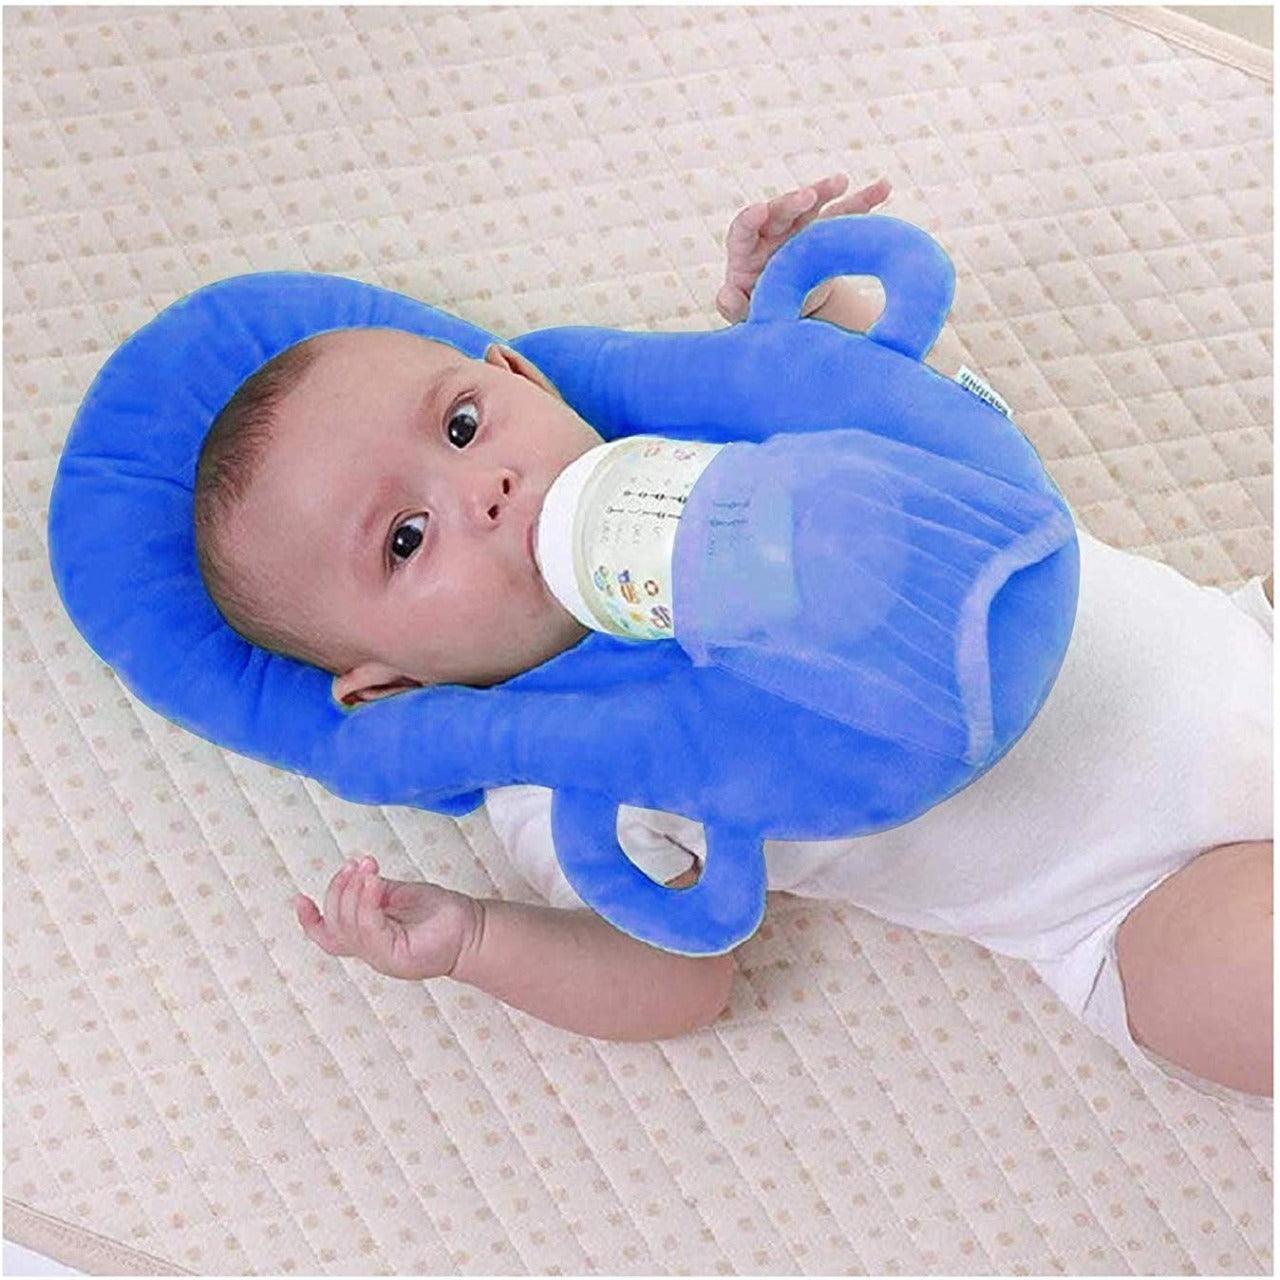 Baby Multifunctional Feeding Pillow Breastfeeding Pillow - Baby Boutique